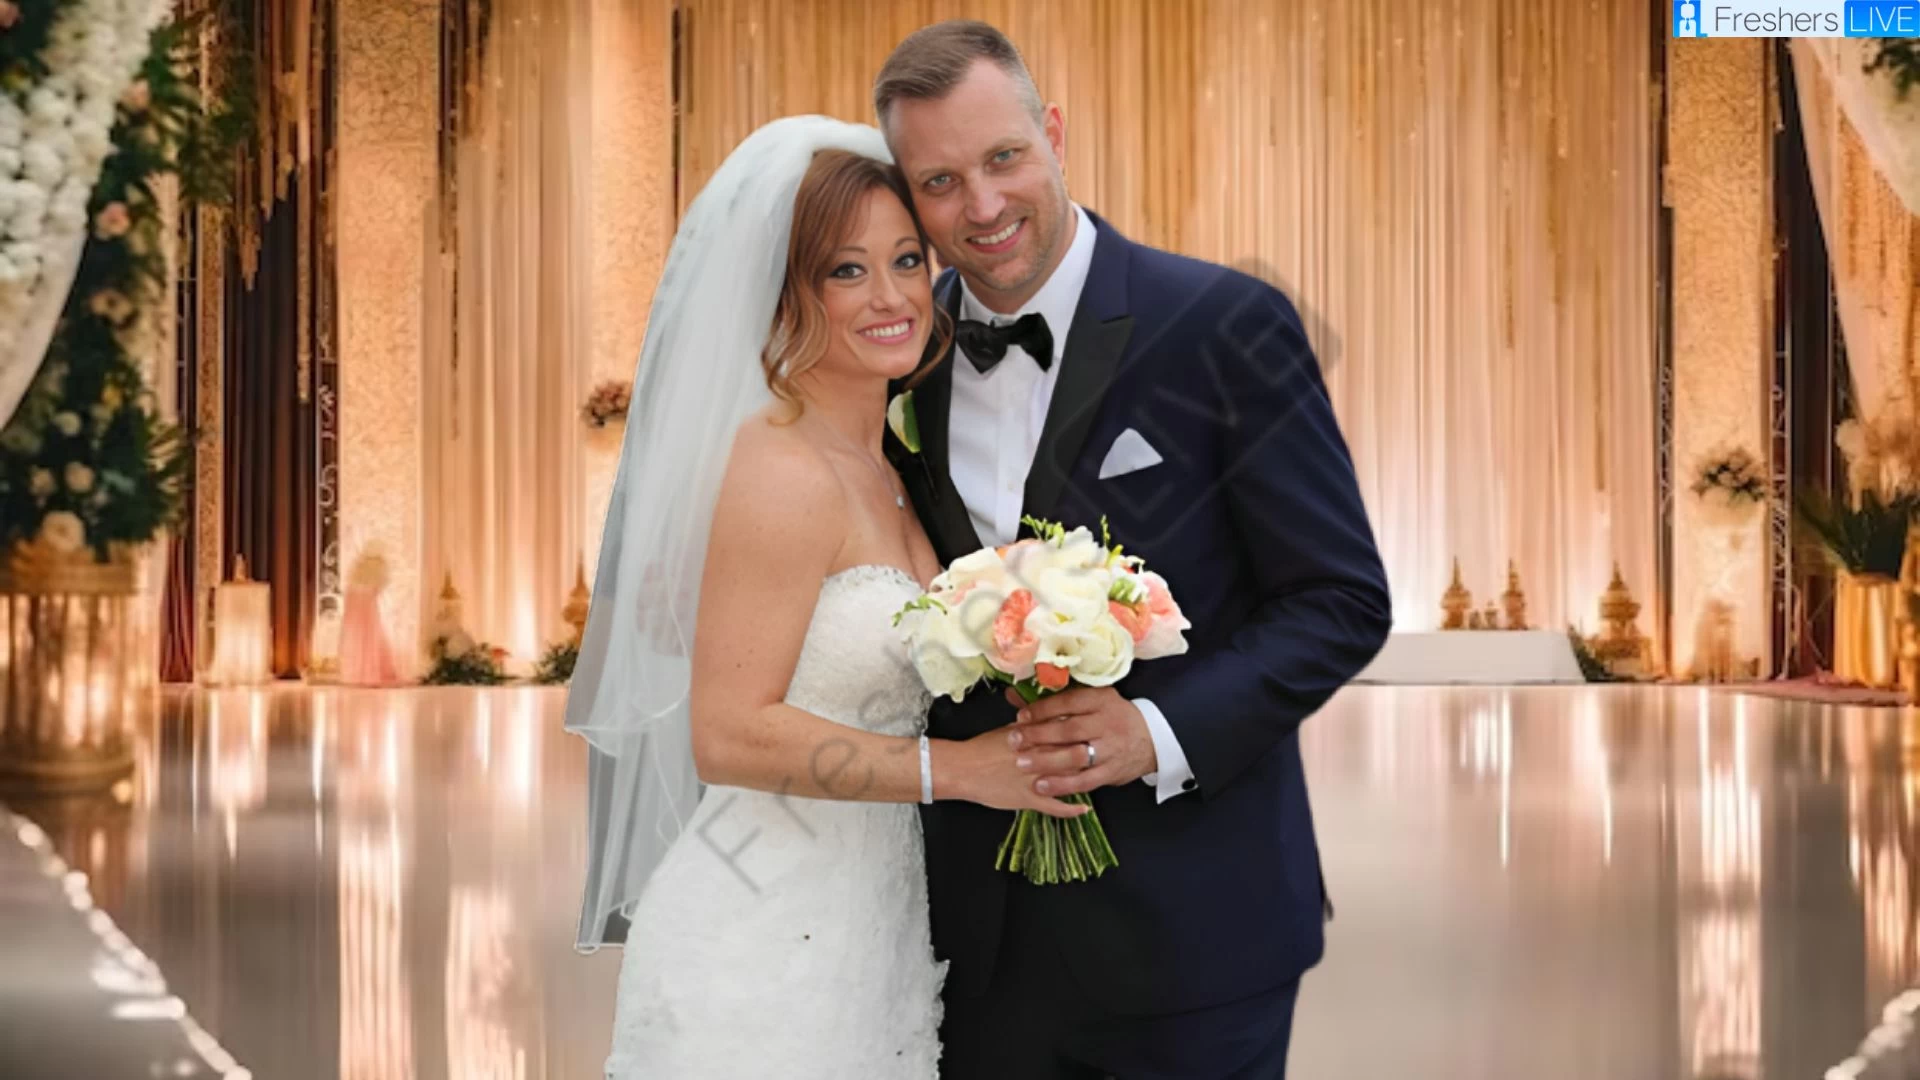 Married At First Sight UK Season 8 Episode 12 Release Date and Time, Countdown, When is it Coming Out?